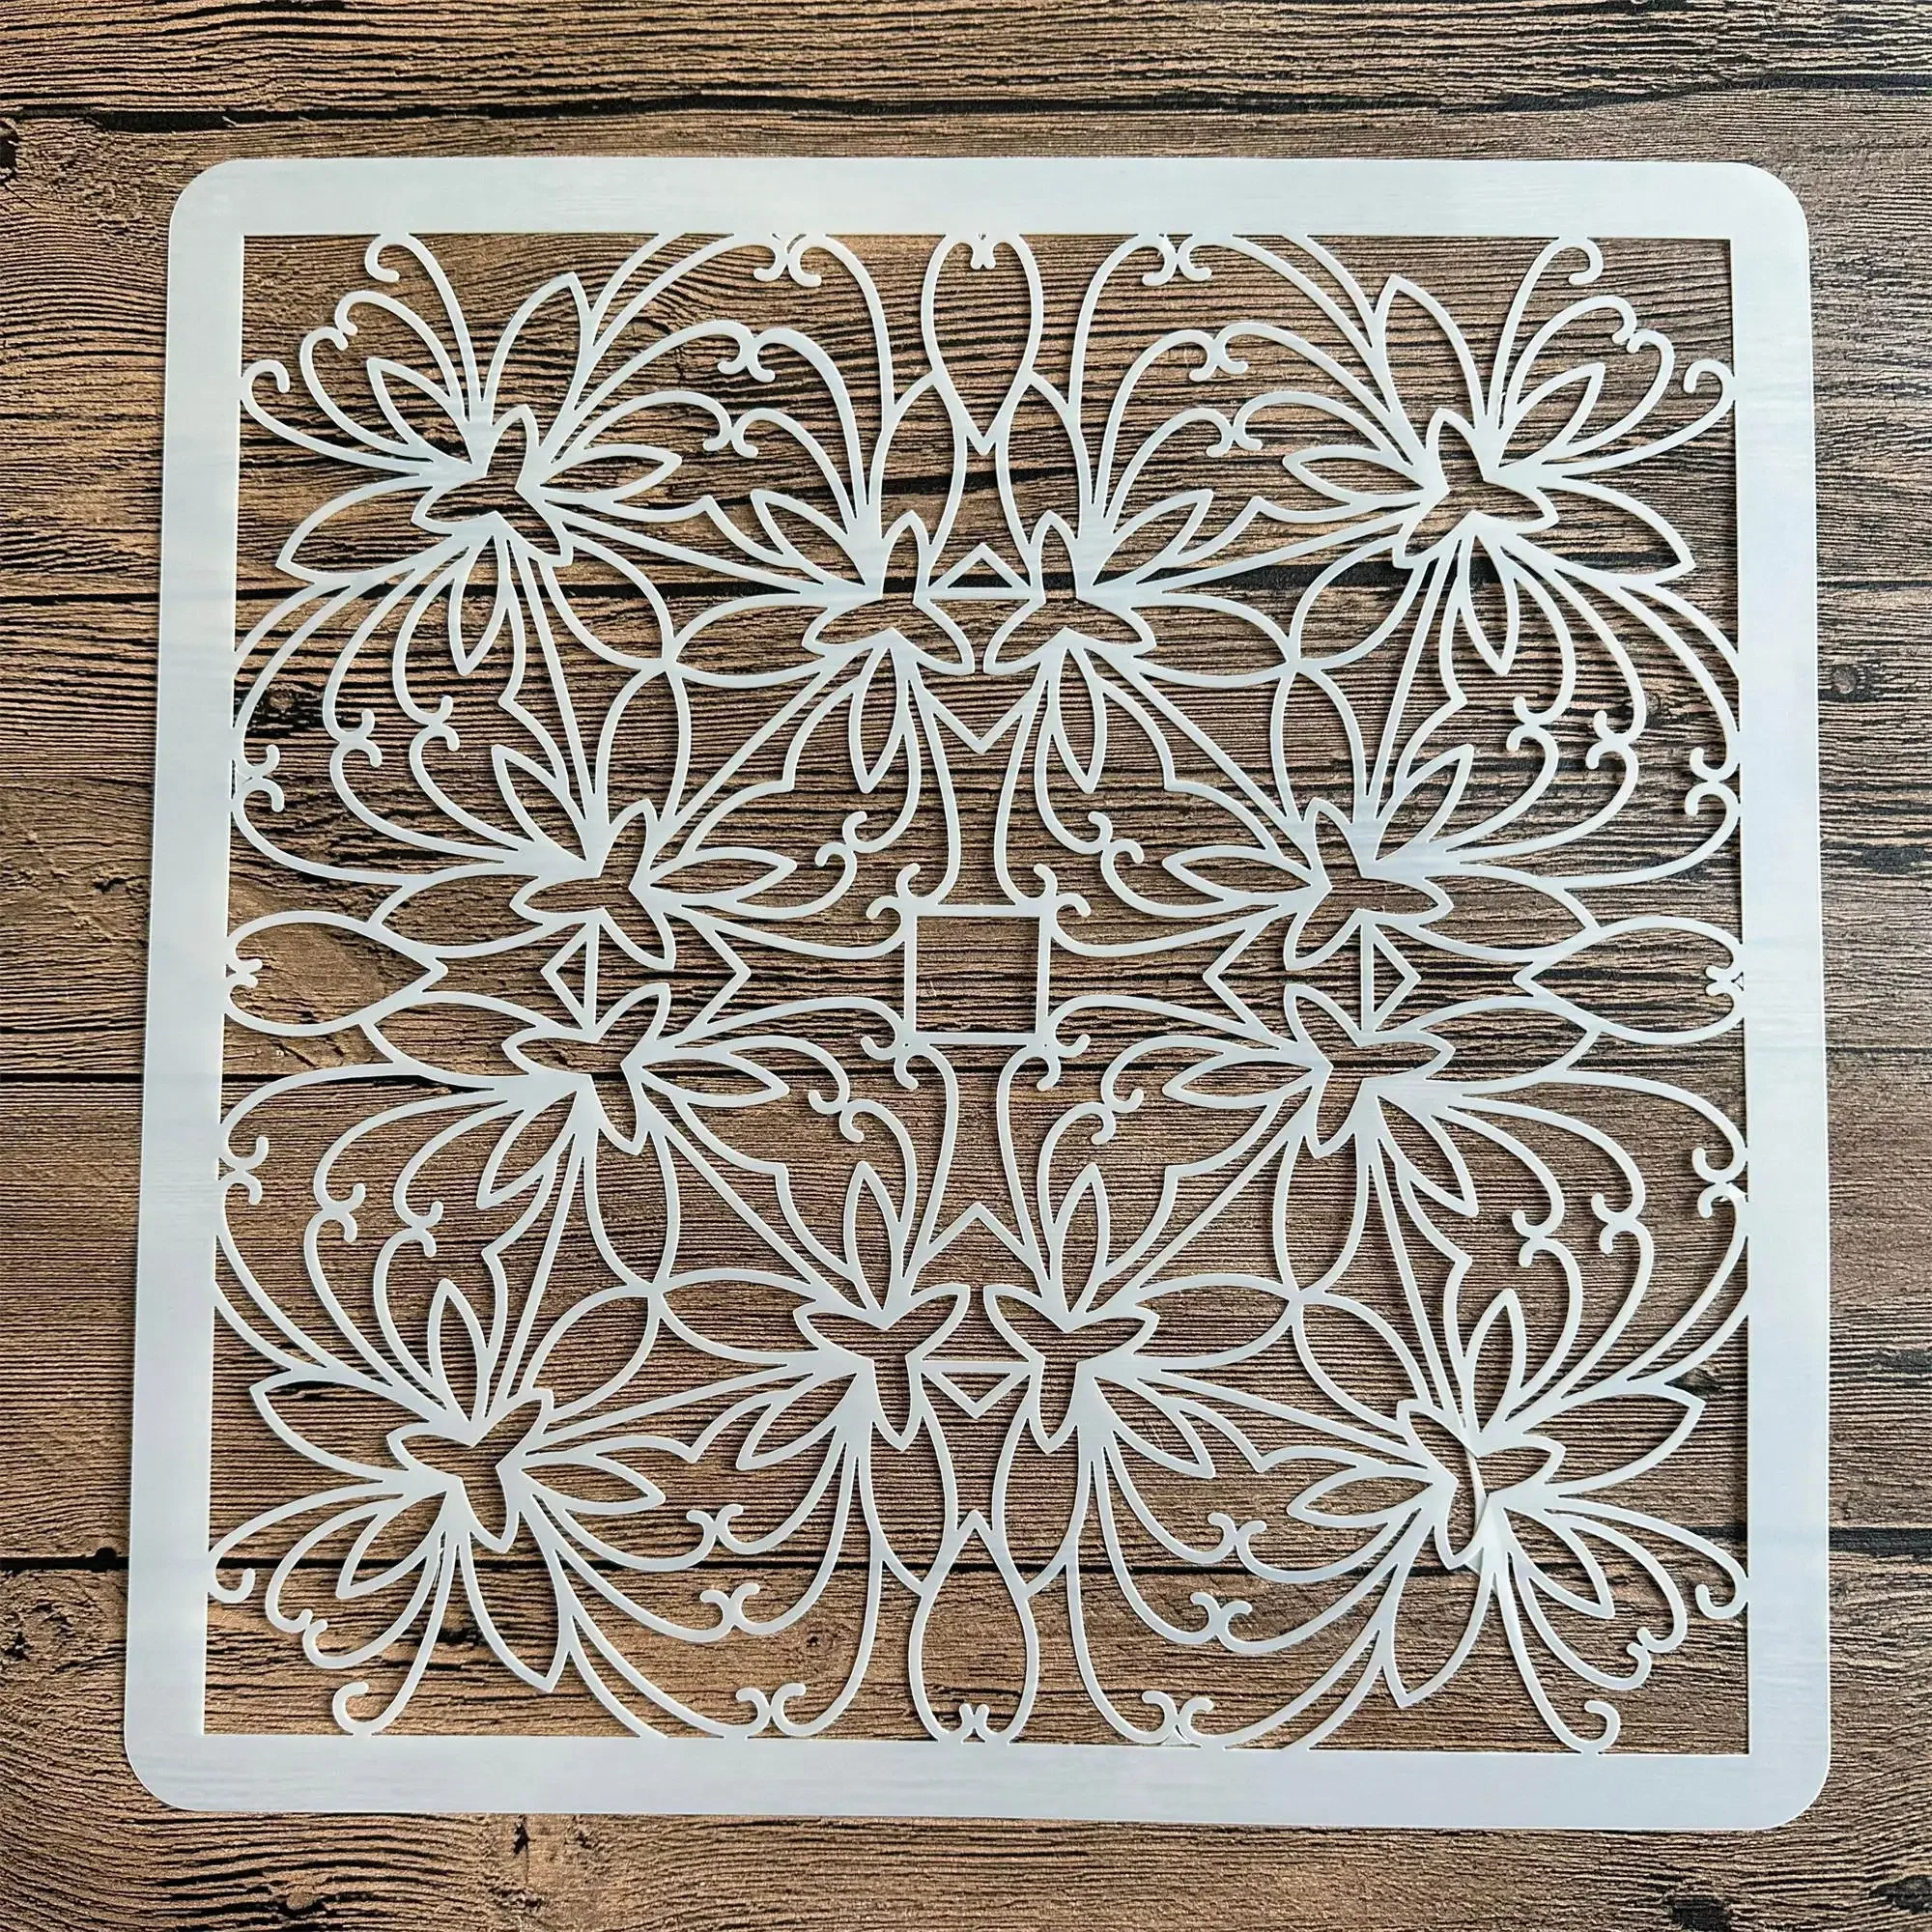 Mandala stencils diy mold for painting stencils stamped photo album embossed paper card on wood, fabric,wall 30 * 30cm size a4 29 21cm leaves diy stencils wall painting scrapbook coloring embossing album decorative paper card template cake